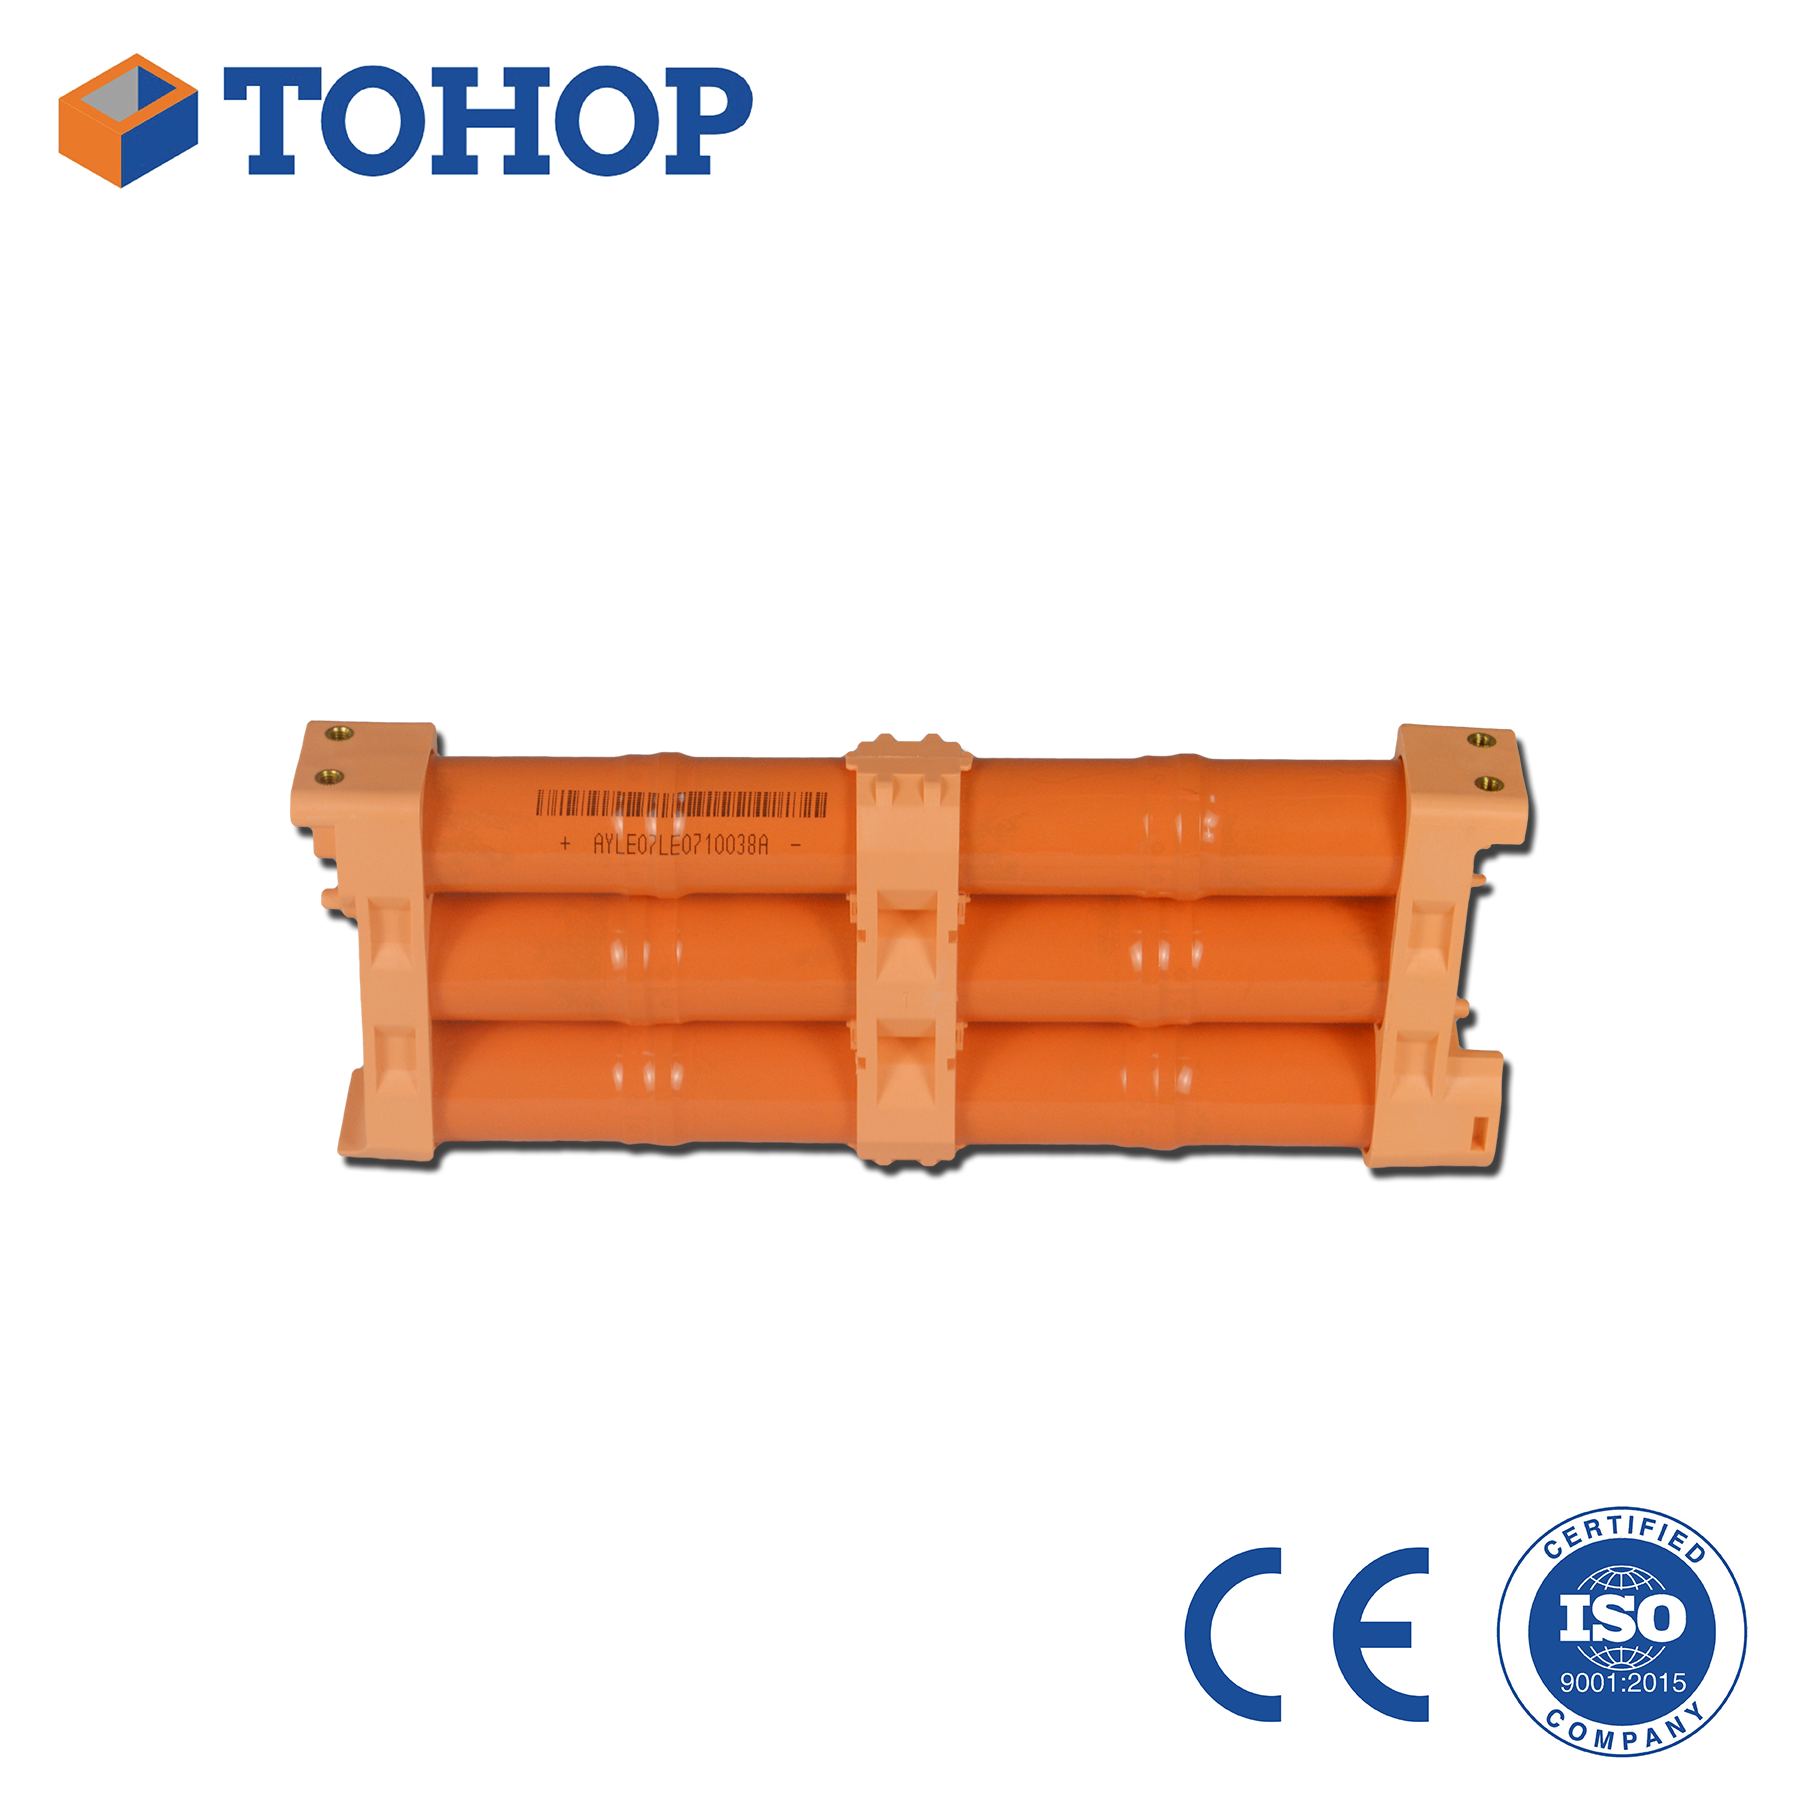 Reliable High Capacity Nimh 14.4v 6.5Ah Cylindrical Battery Module For Toyota for Prius 2010-2014 Prius Hybrid Car Battery